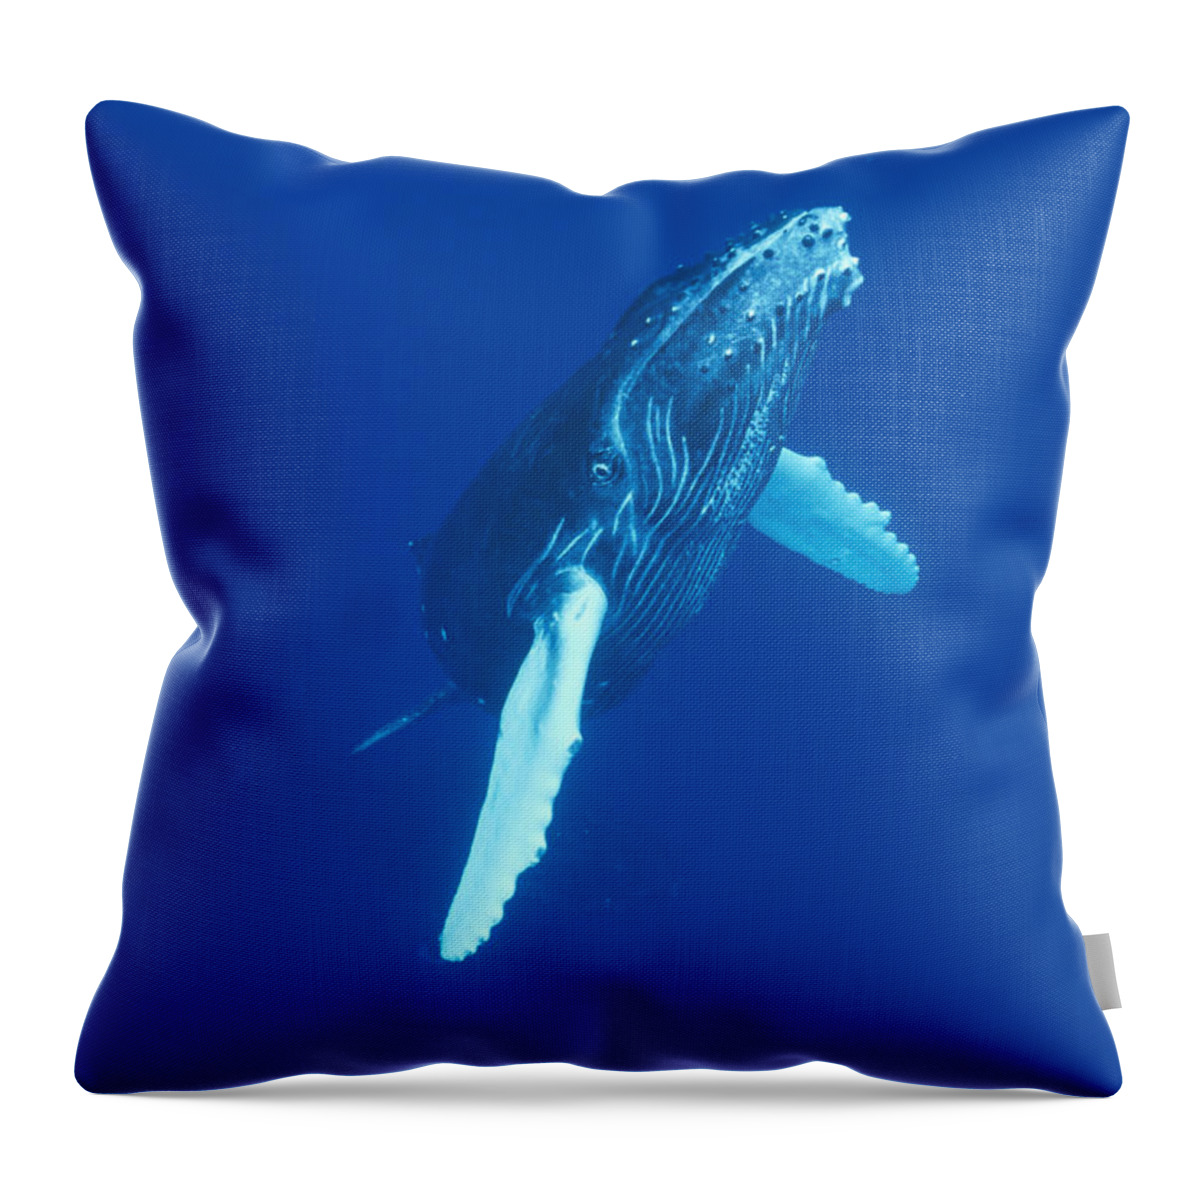 00114523 Throw Pillow featuring the photograph Curious Humpback Whale Calf Off Maui by Flip Nicklin